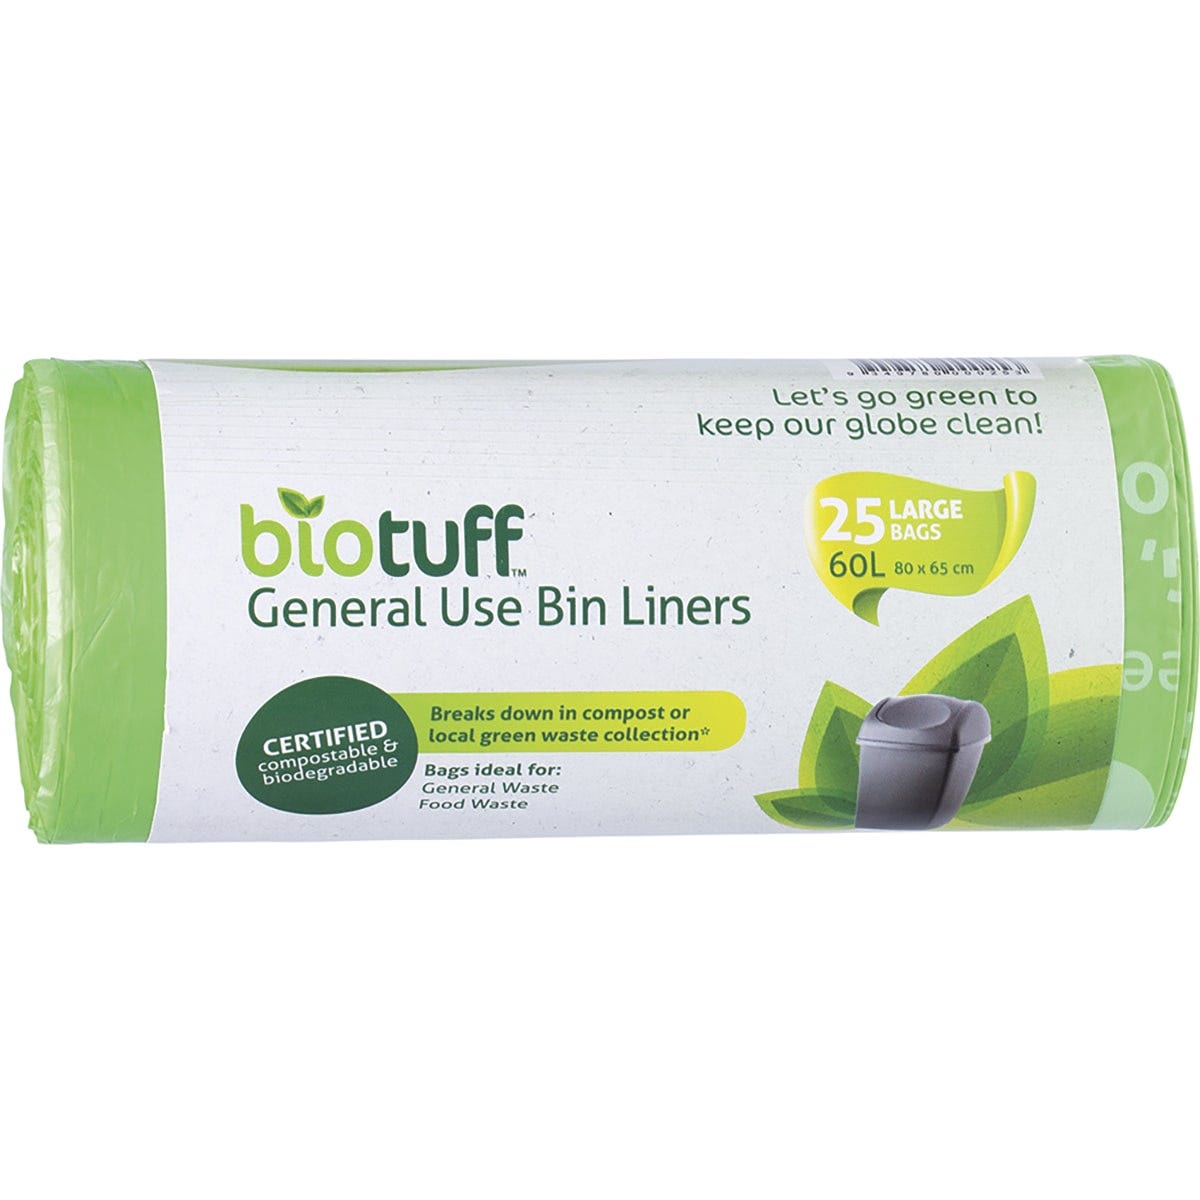 Biotuff General Use Bin Liners Large Bags 60L 25pk - Dr Earth - Cleaning